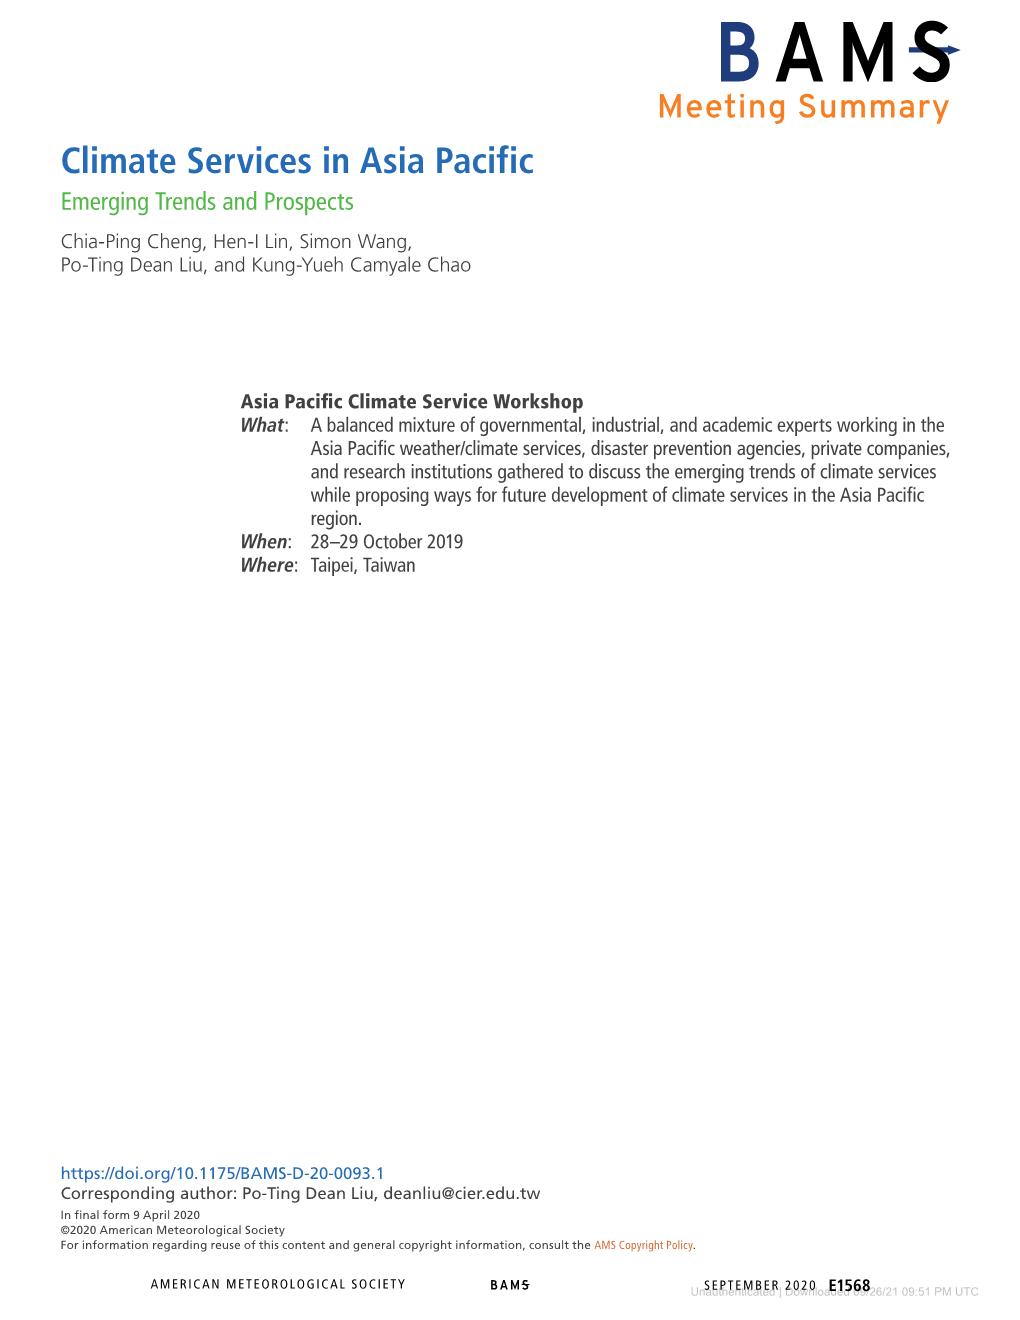 Climate Services in Asia Pacific Emerging Trends and Prospects Chia-Ping Cheng, Hen-I Lin, Simon Wang, Po-Ting Dean Liu, and Kung-Yueh Camyale Chao